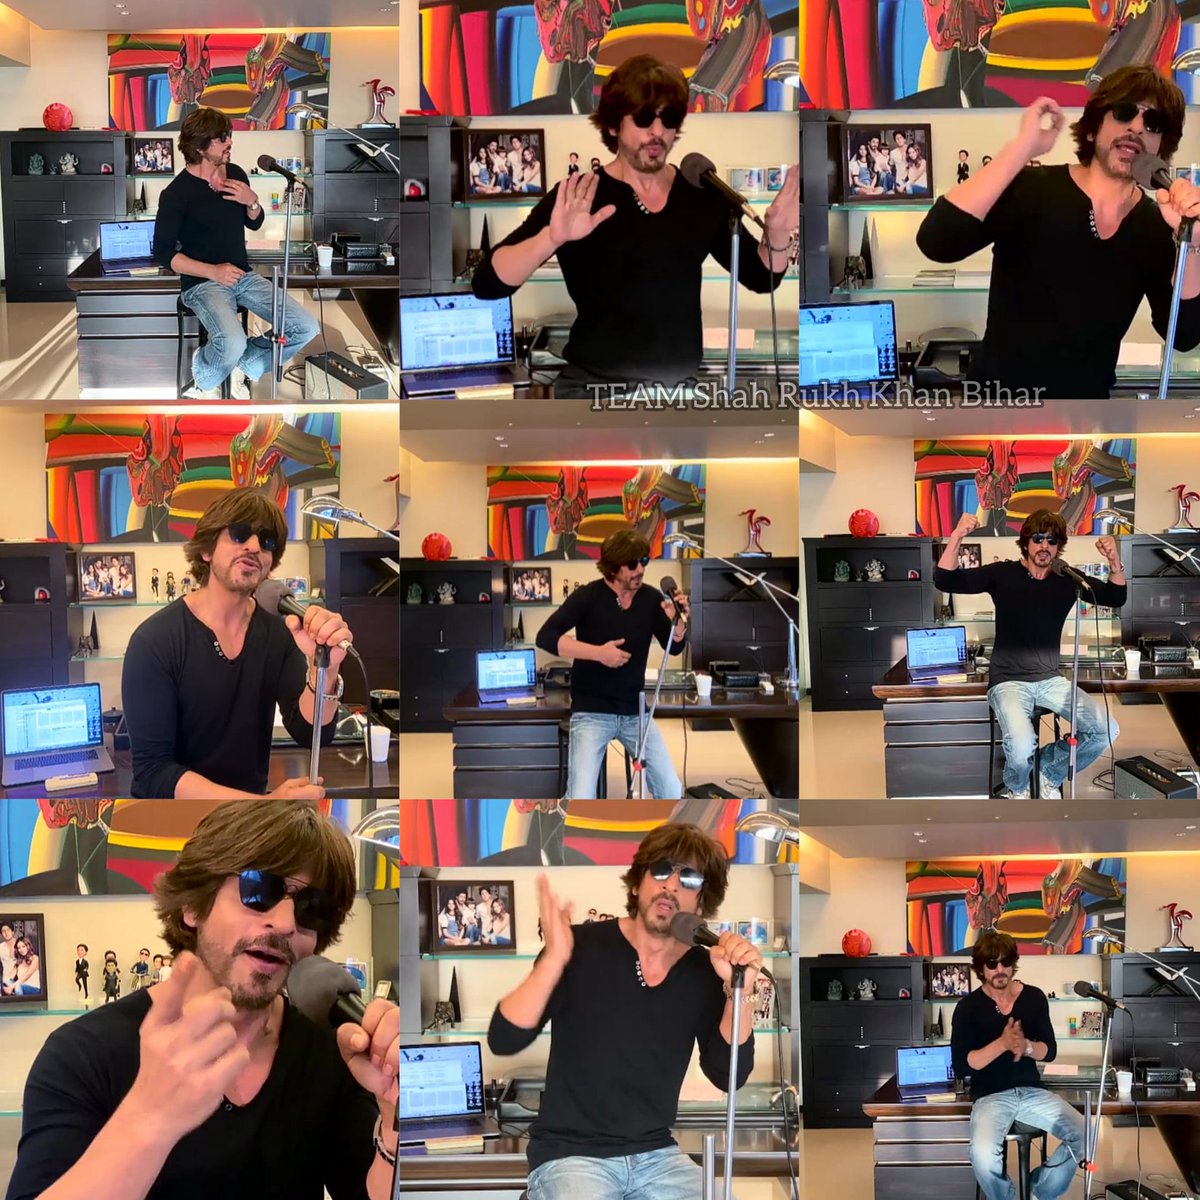 SRK with 🎤

Ufff the charms 😍🔥

 'Sab Thik ho Jayega'  #IForIndia Concerts held in @facebookapp by @give_india.

Thank you SHAH RUKH KHAN for filling us with too much Positive Vibes in this Pandemic Situation ❣️
.
.
.
#IForIndia #CoronaVirus #IndiaSalutesCoronaWarriors